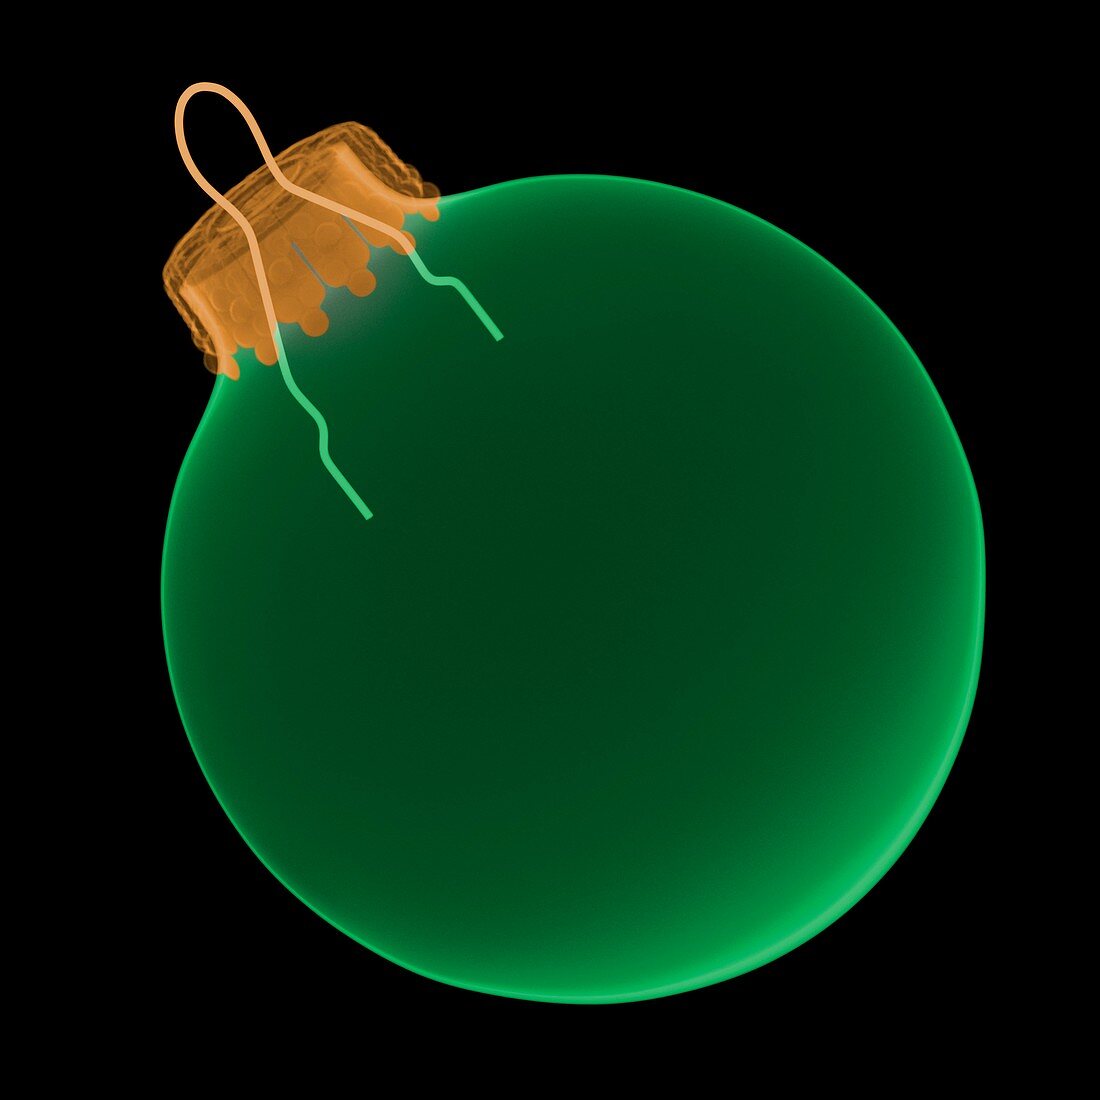 Green bauble, X-ray